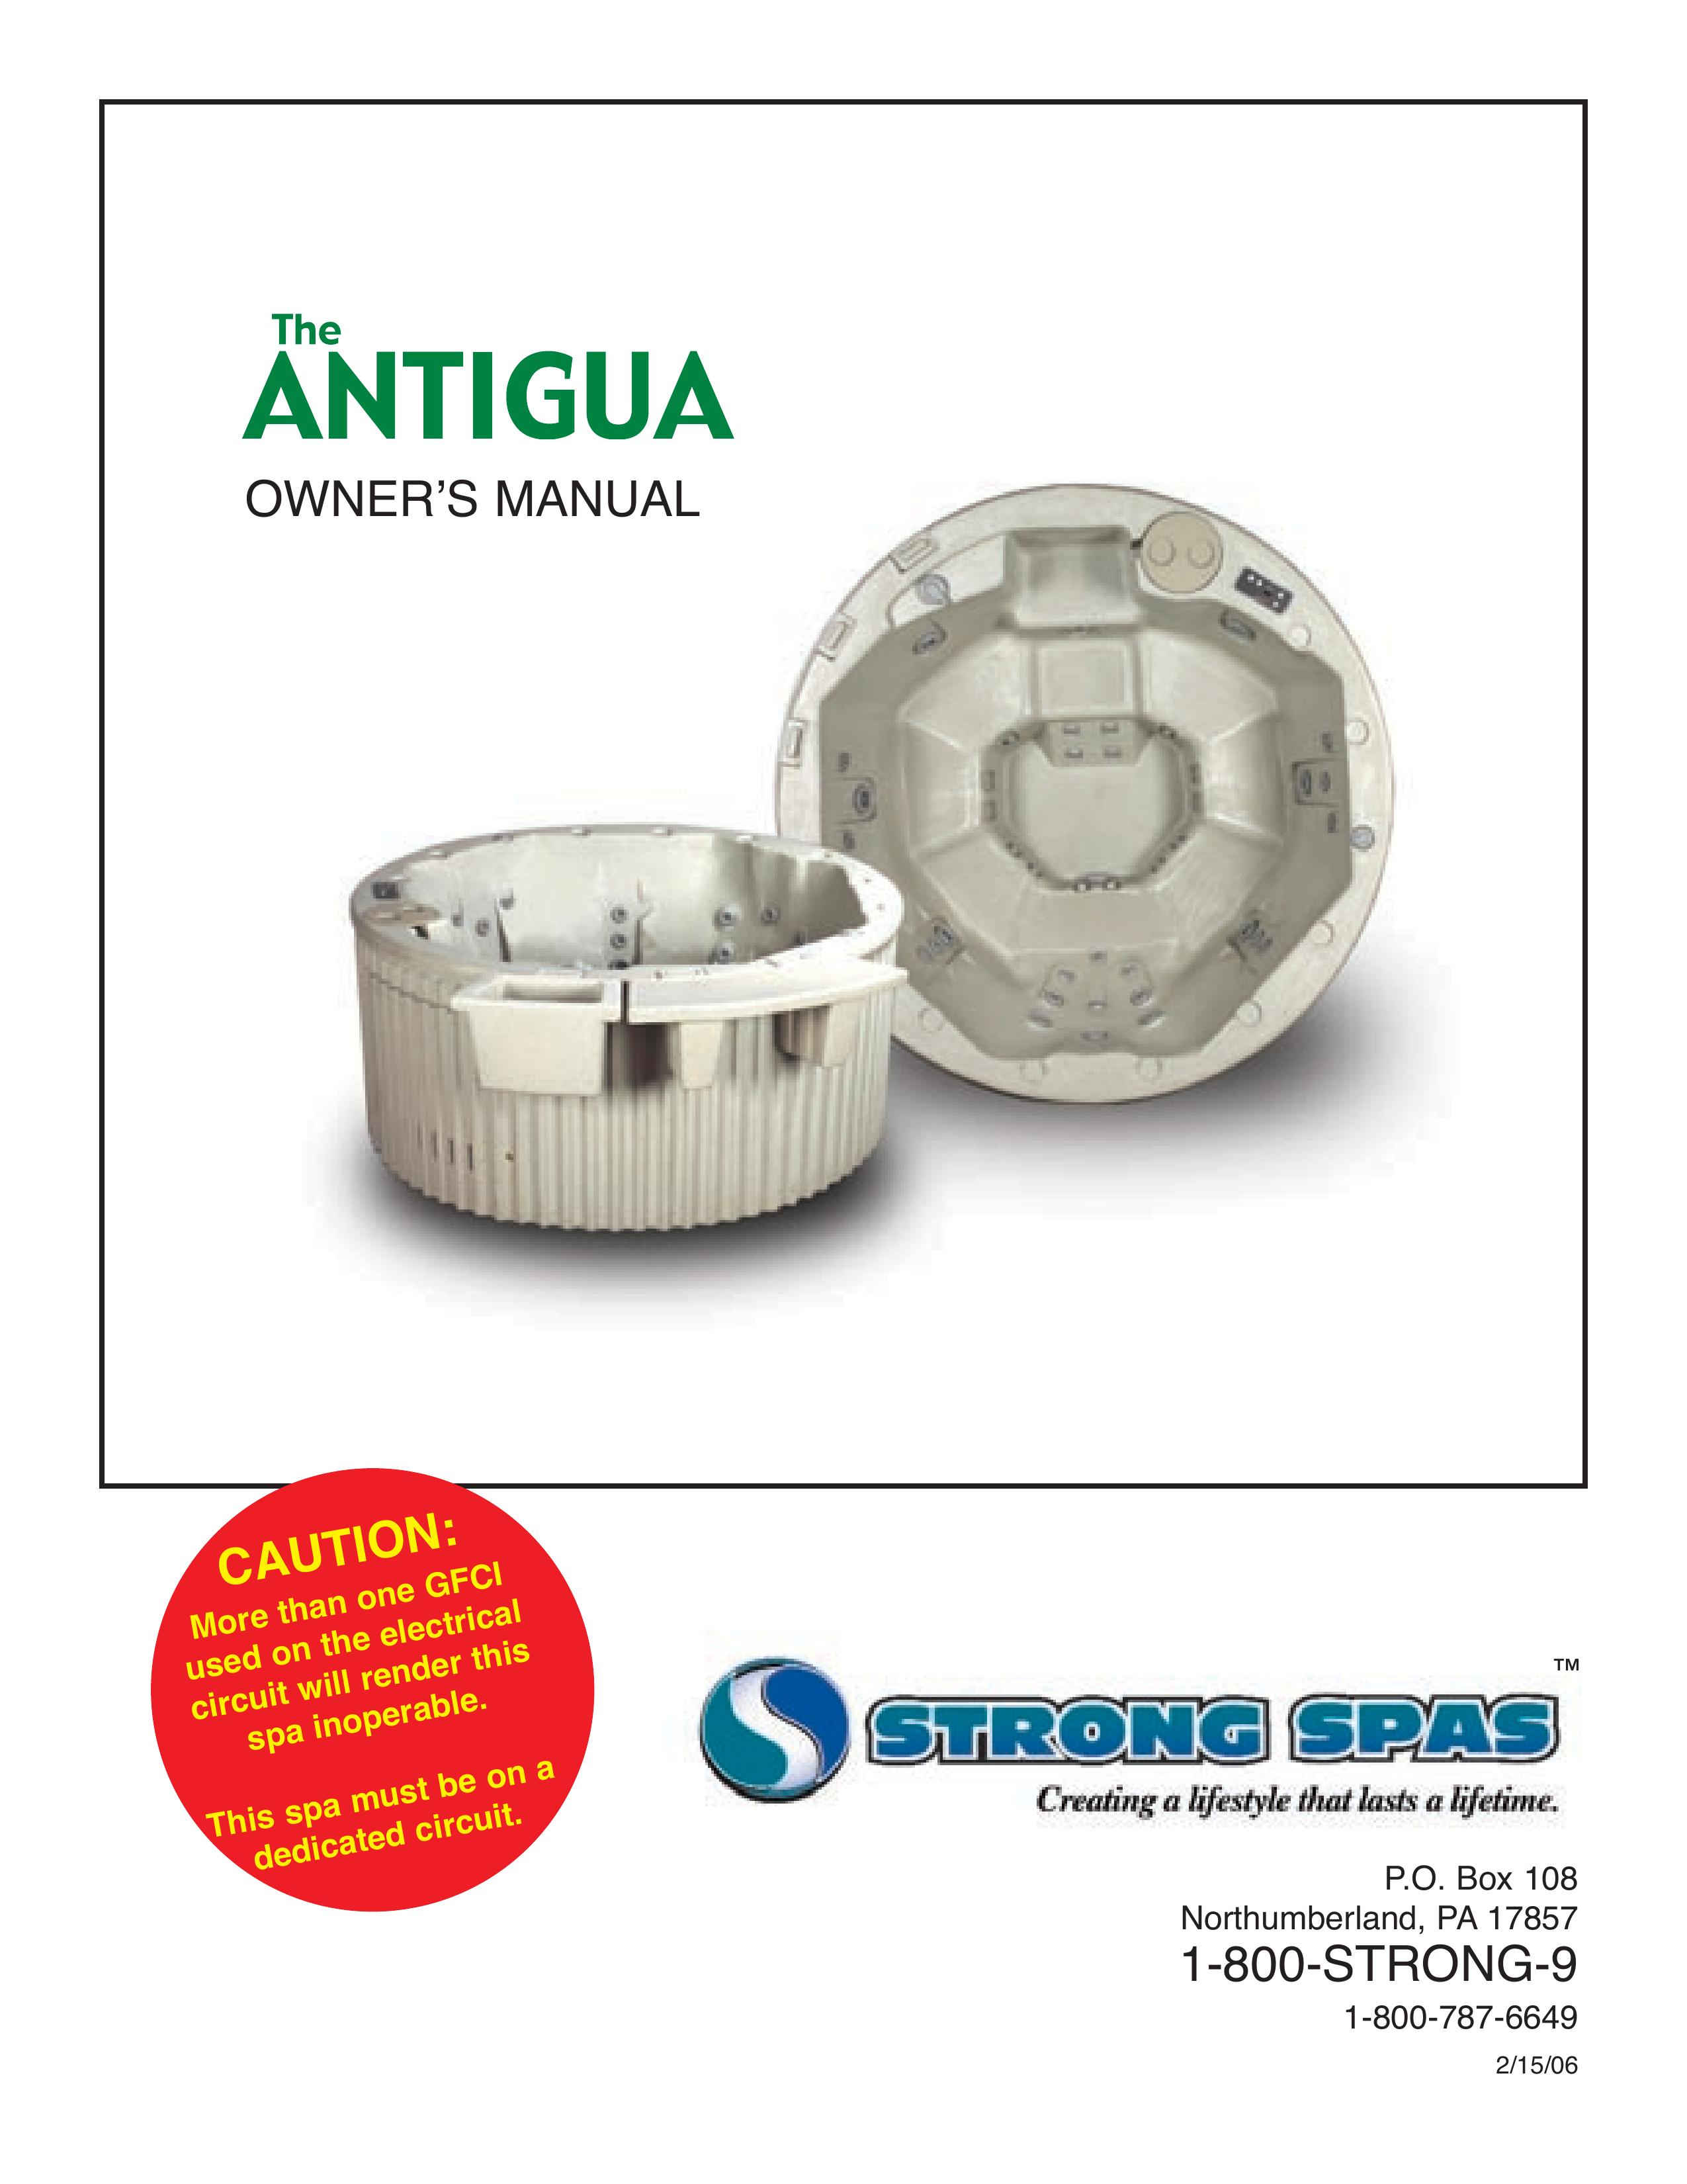 Strong Pools and Spas The Antigua Hot Tub User Manual